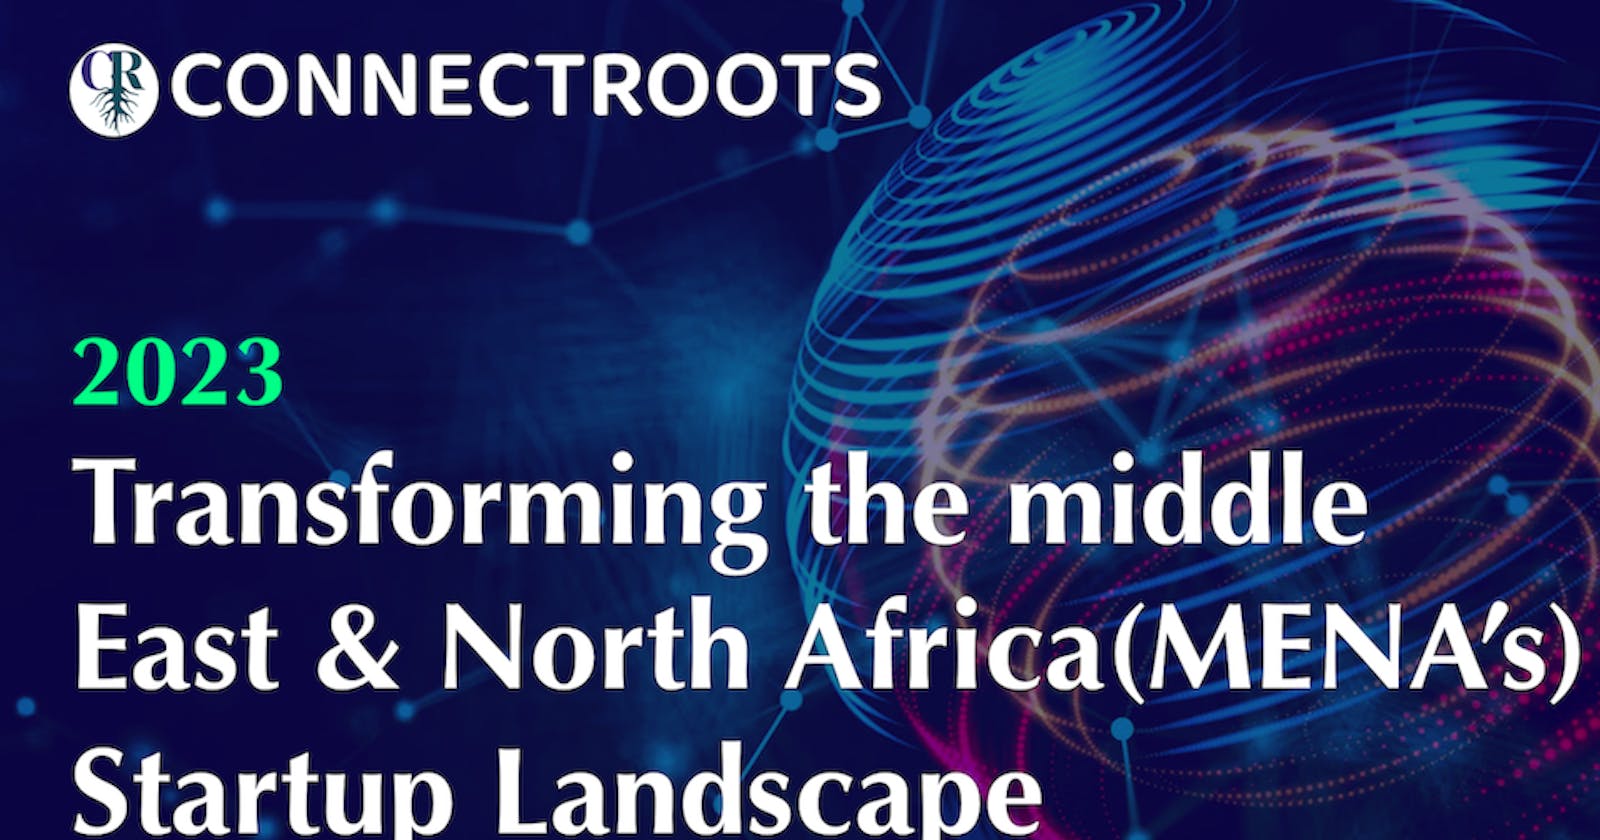 The Genesis of Connectroots, A Vision for MENA's Startup Ecosystem